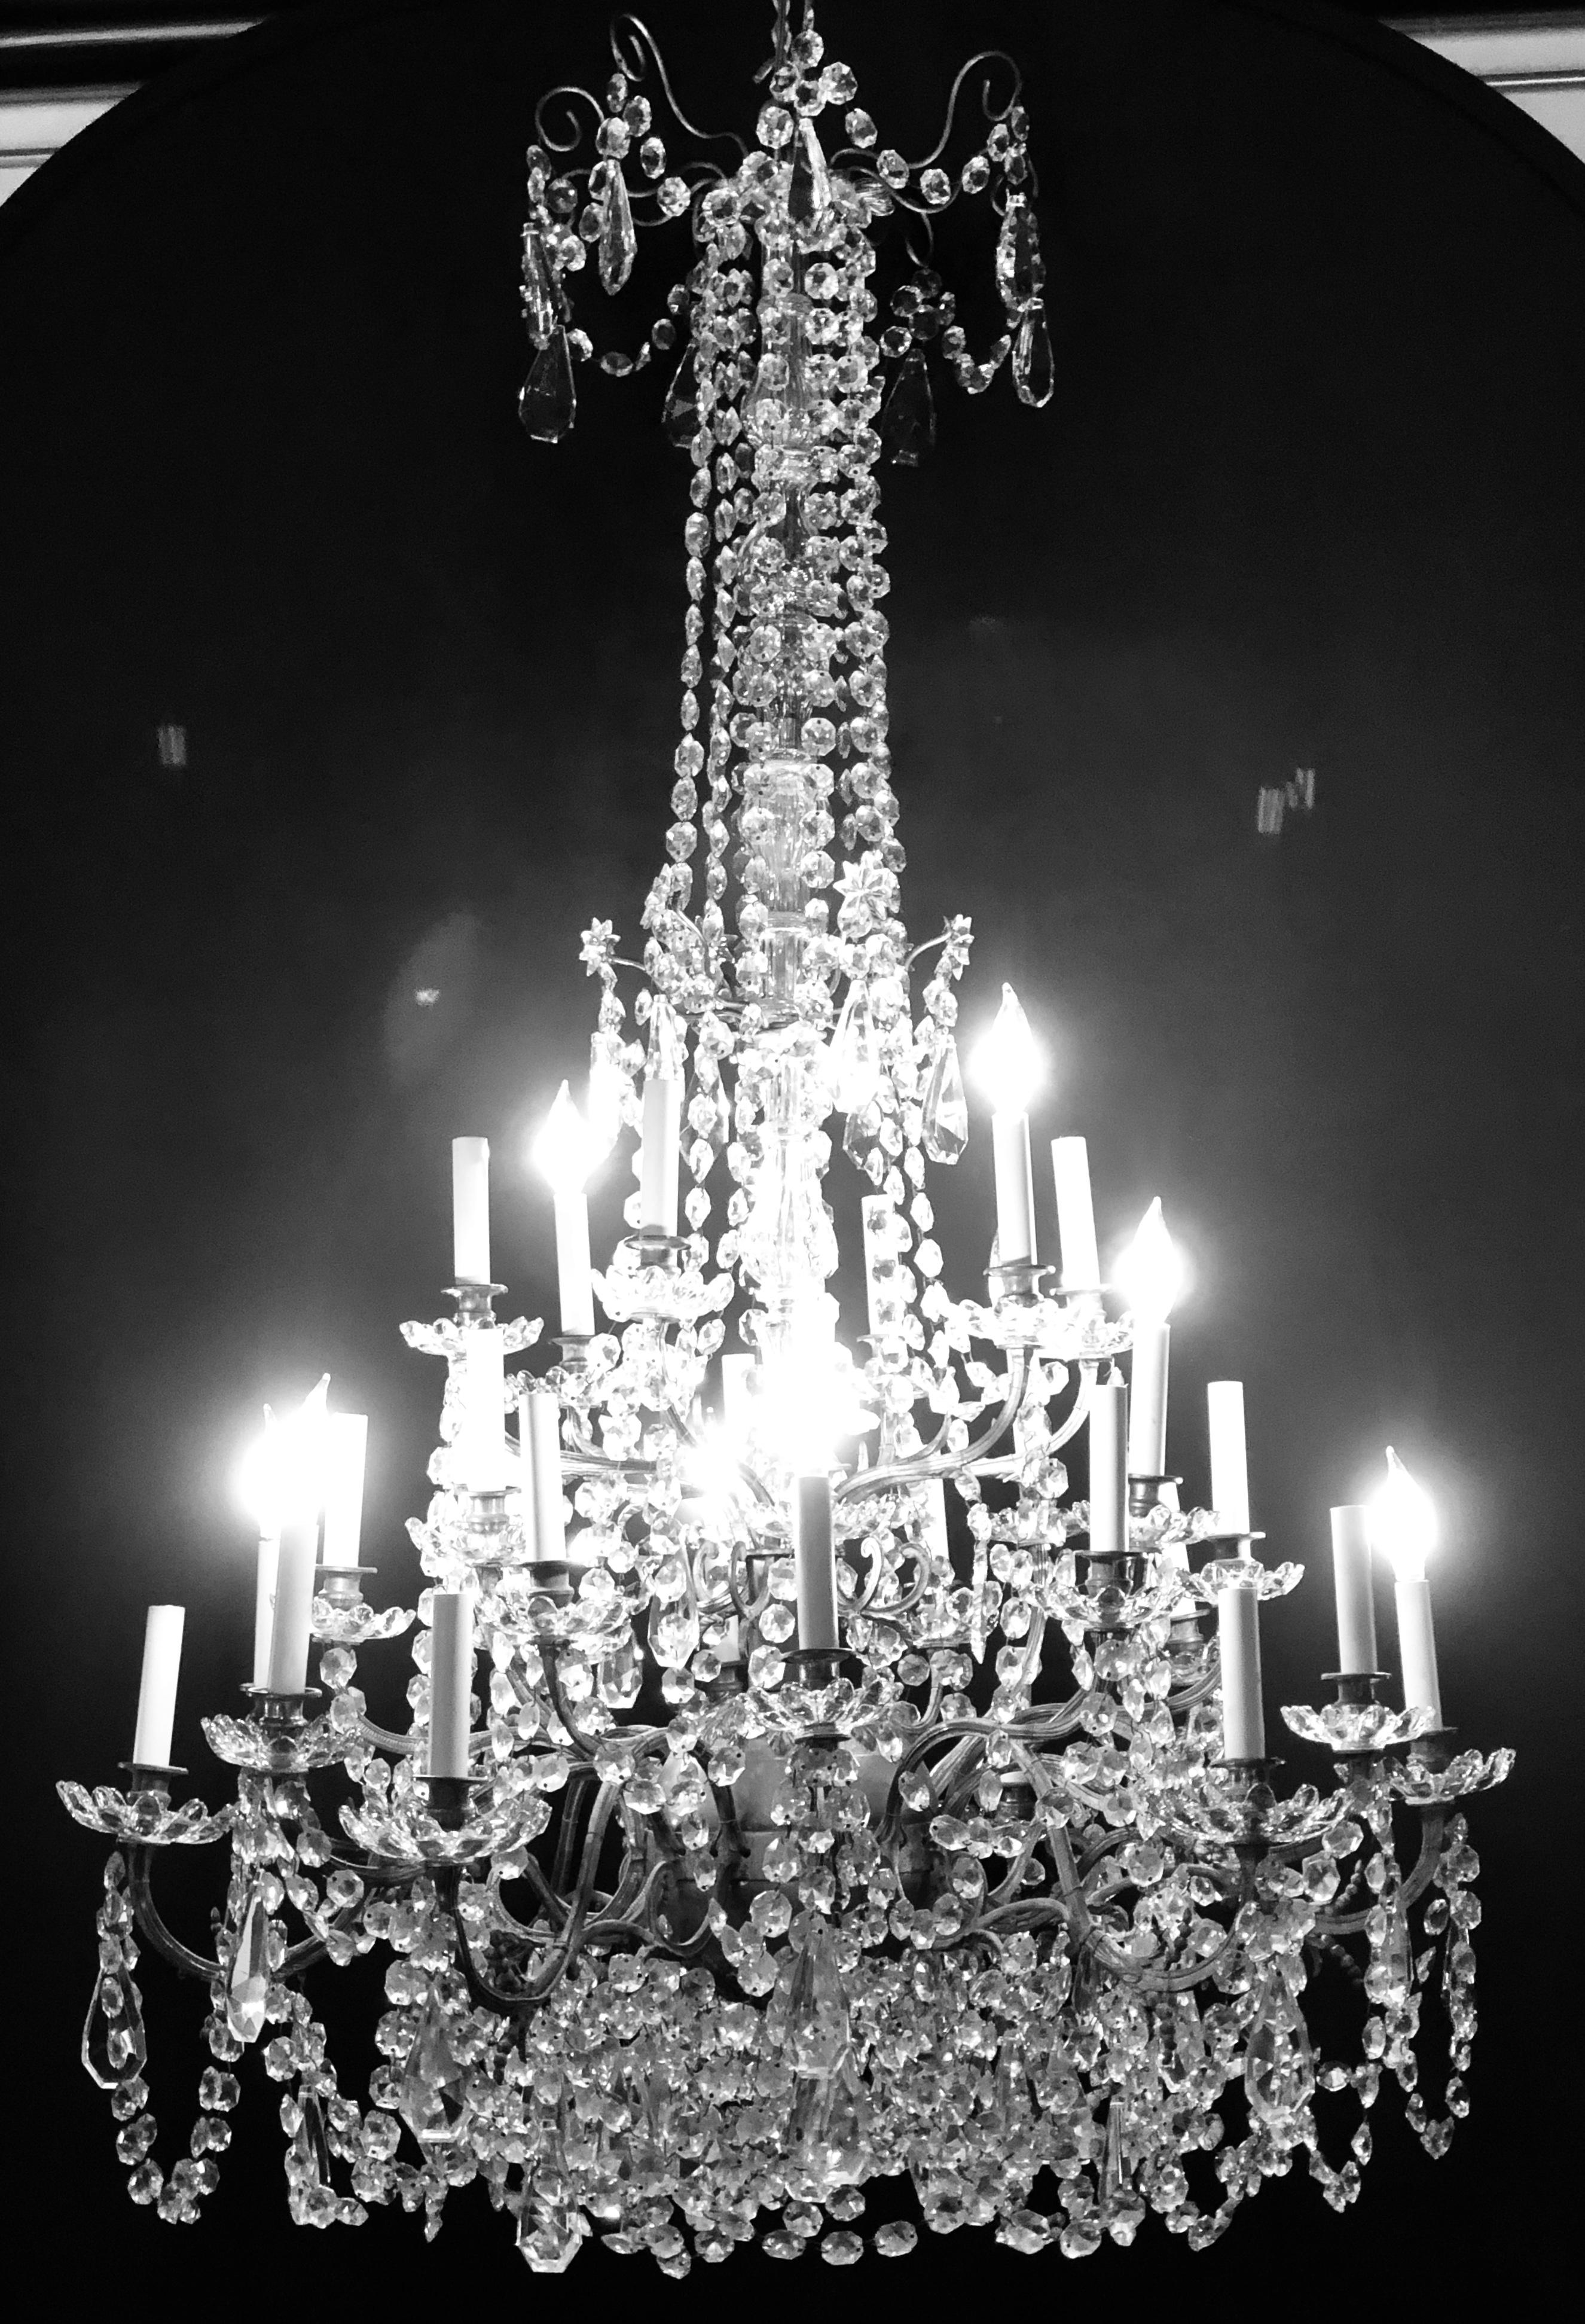 Palatial 19th or early 20th century thirty-light French crystal and brass column-form chandelier. This spectacular fixture has a central circular sphere that has a myriad of flowing gleaming cut crystals sprouting from the centre. The centre support